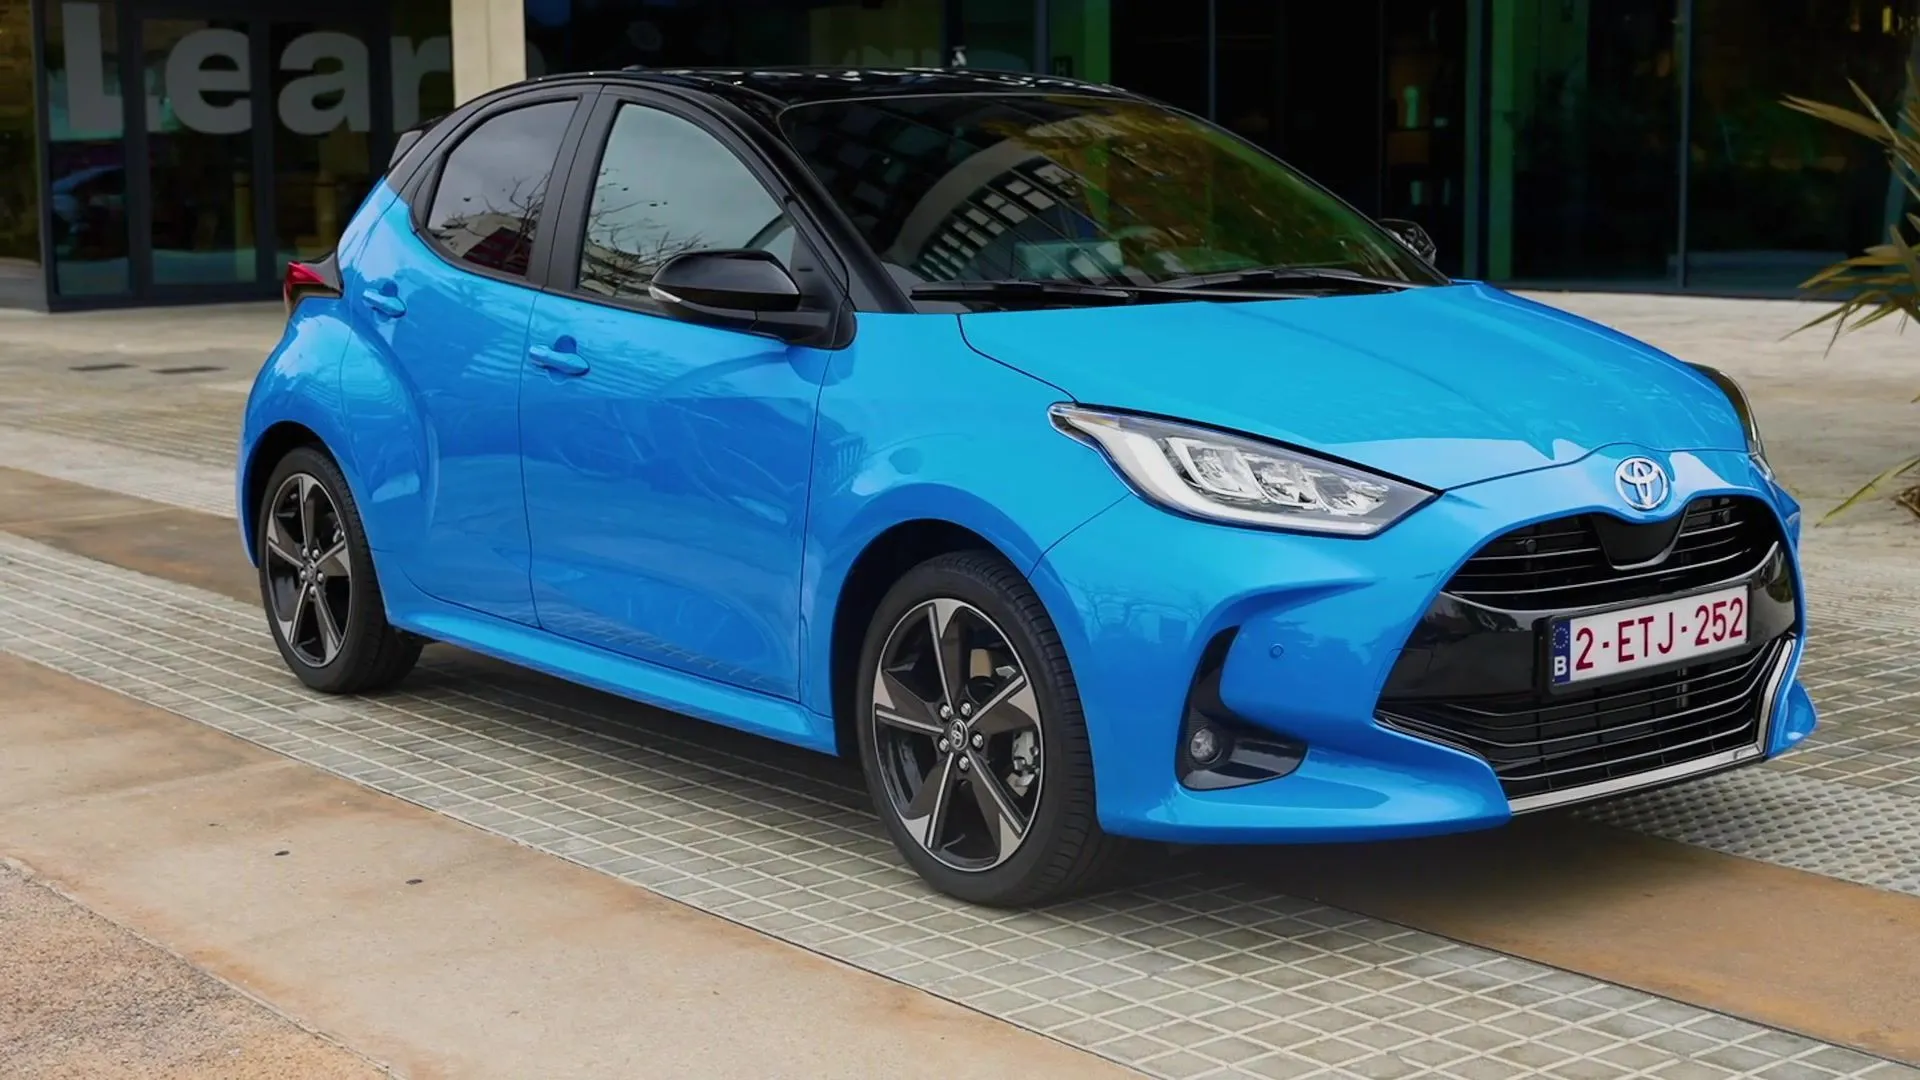 The new Toyota Yaris Hybrid - Toyota T-Mate makes driving safer and easier